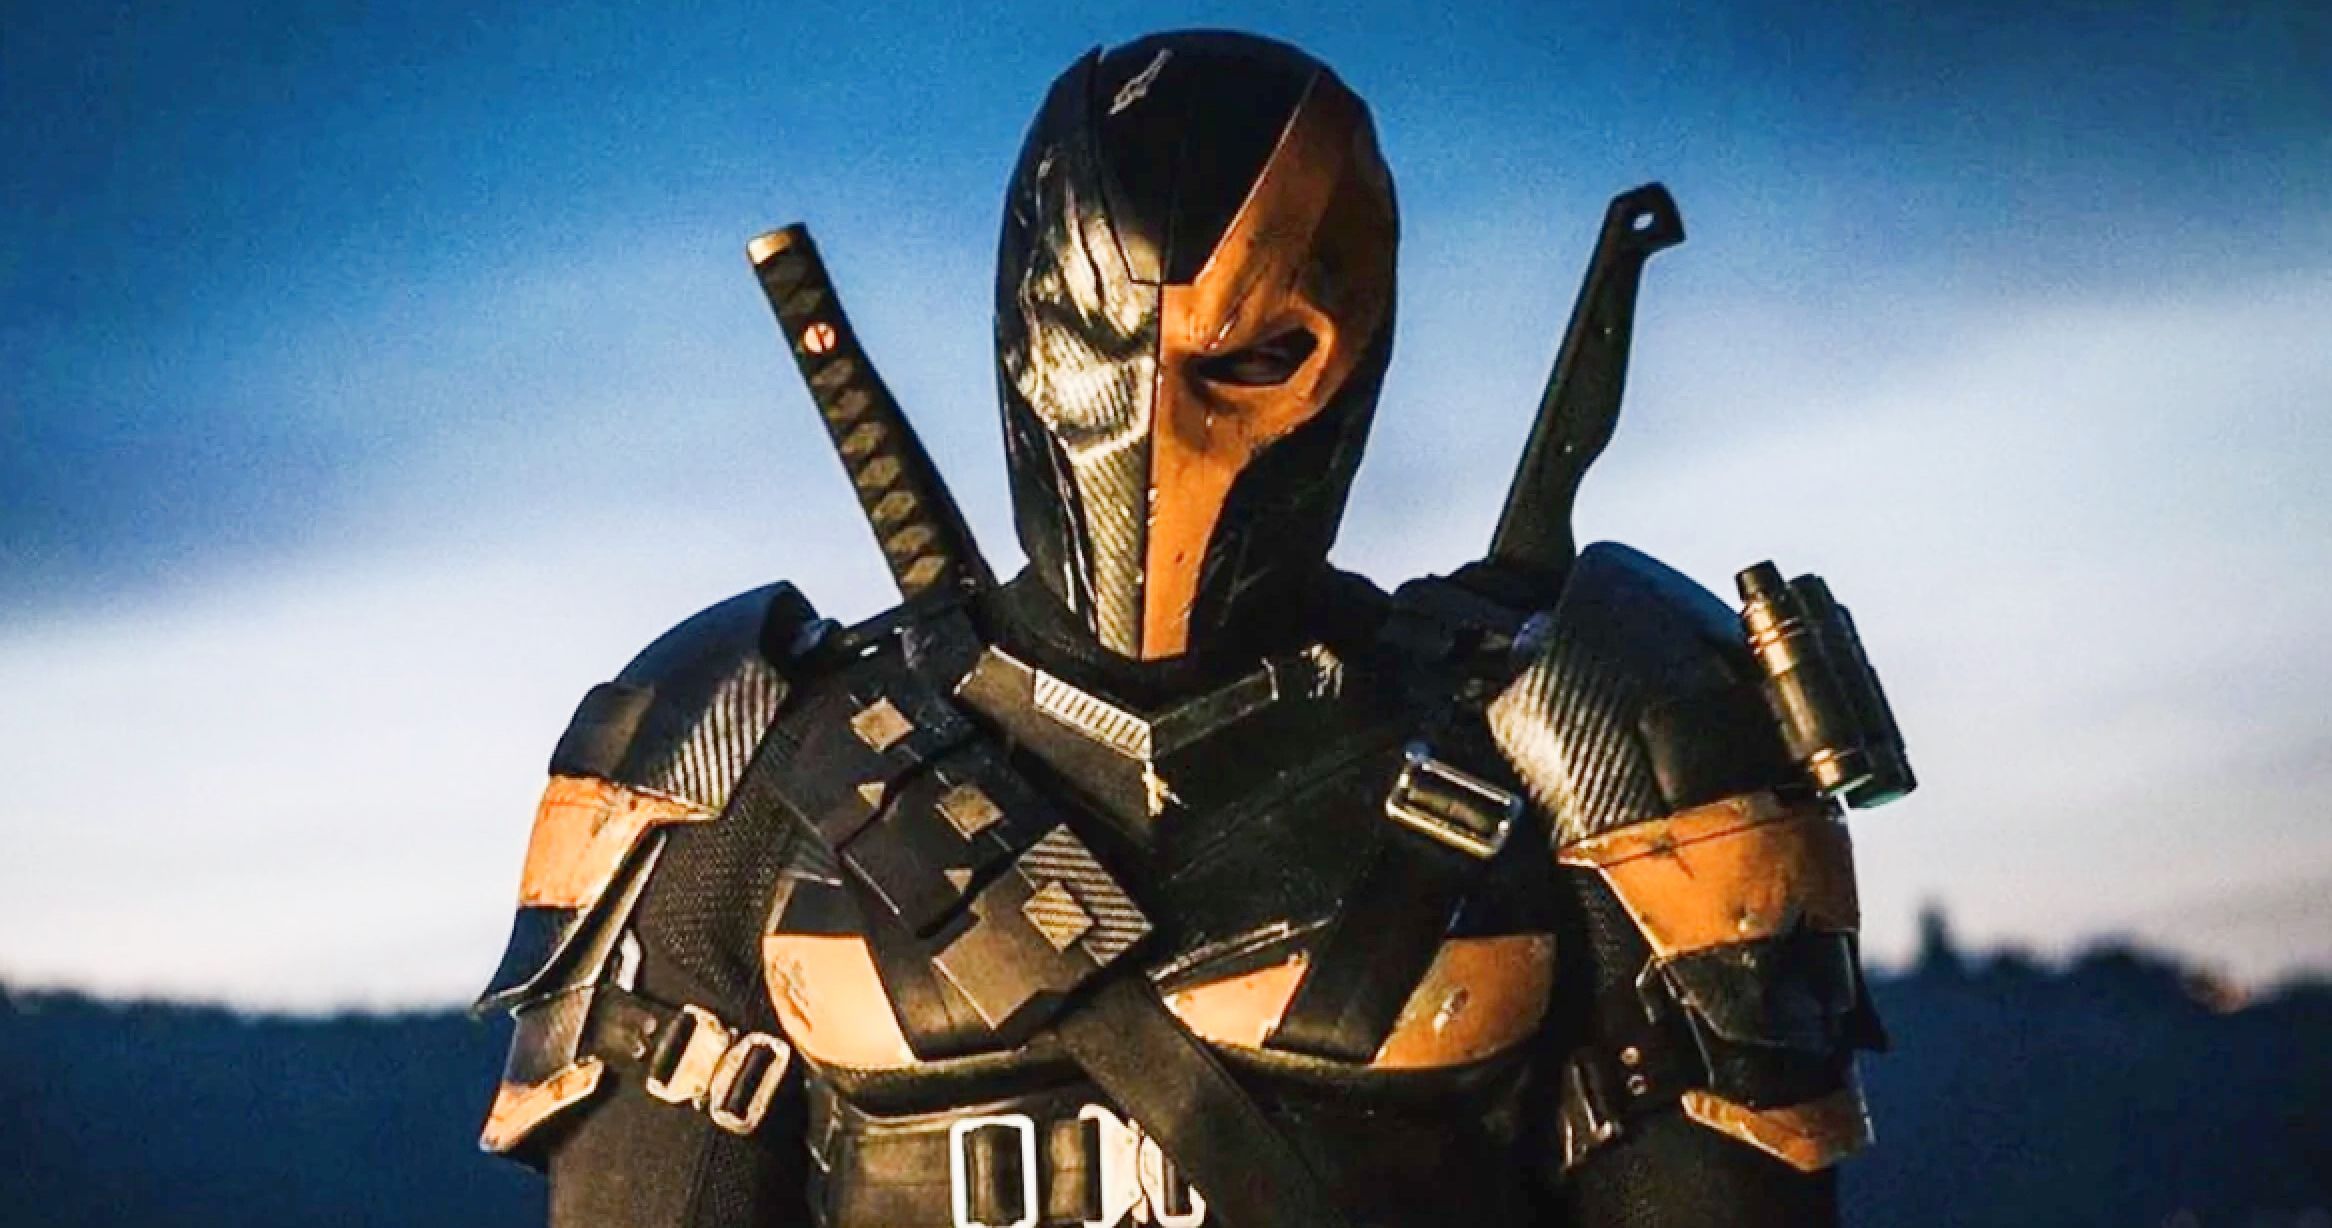 Deathstroke's Twist Role in Zack Snyder's Justice League Revealed